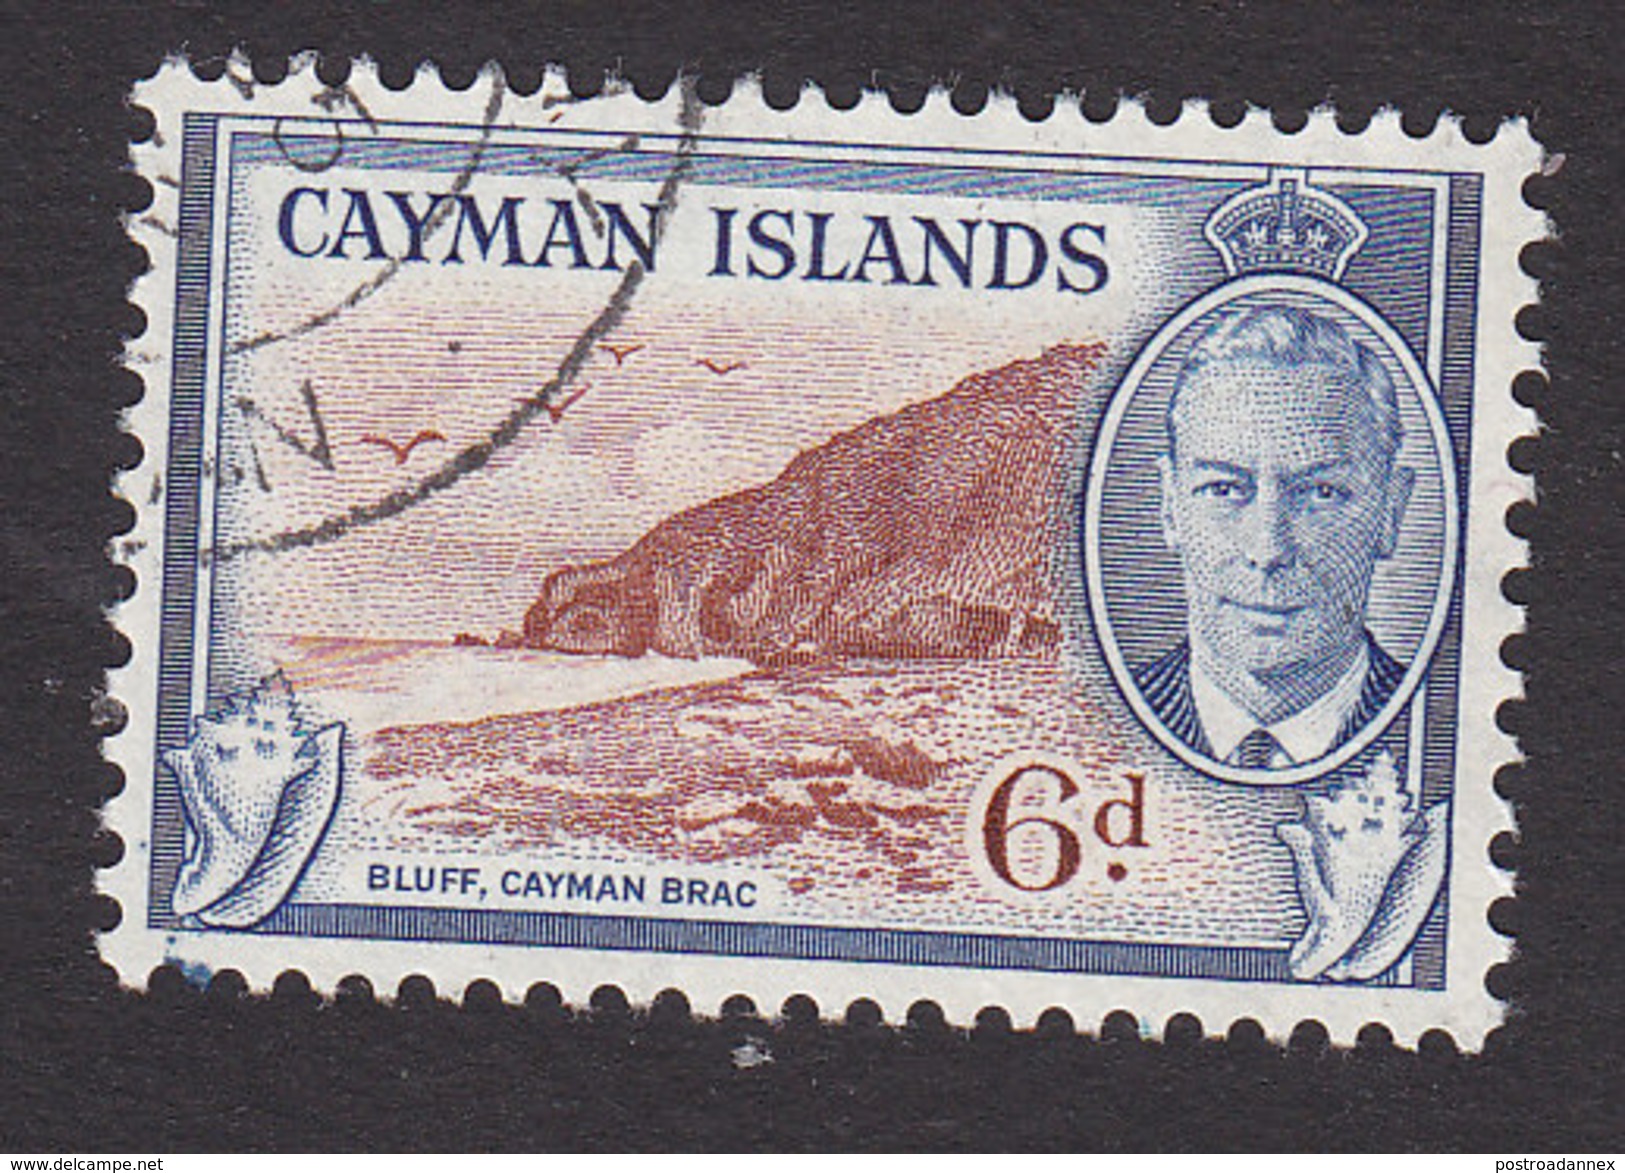 Cayman Islands, Scott #129, Used, George VI And Scene Of Cayman Islands, Issued 1950 - Kaimaninseln